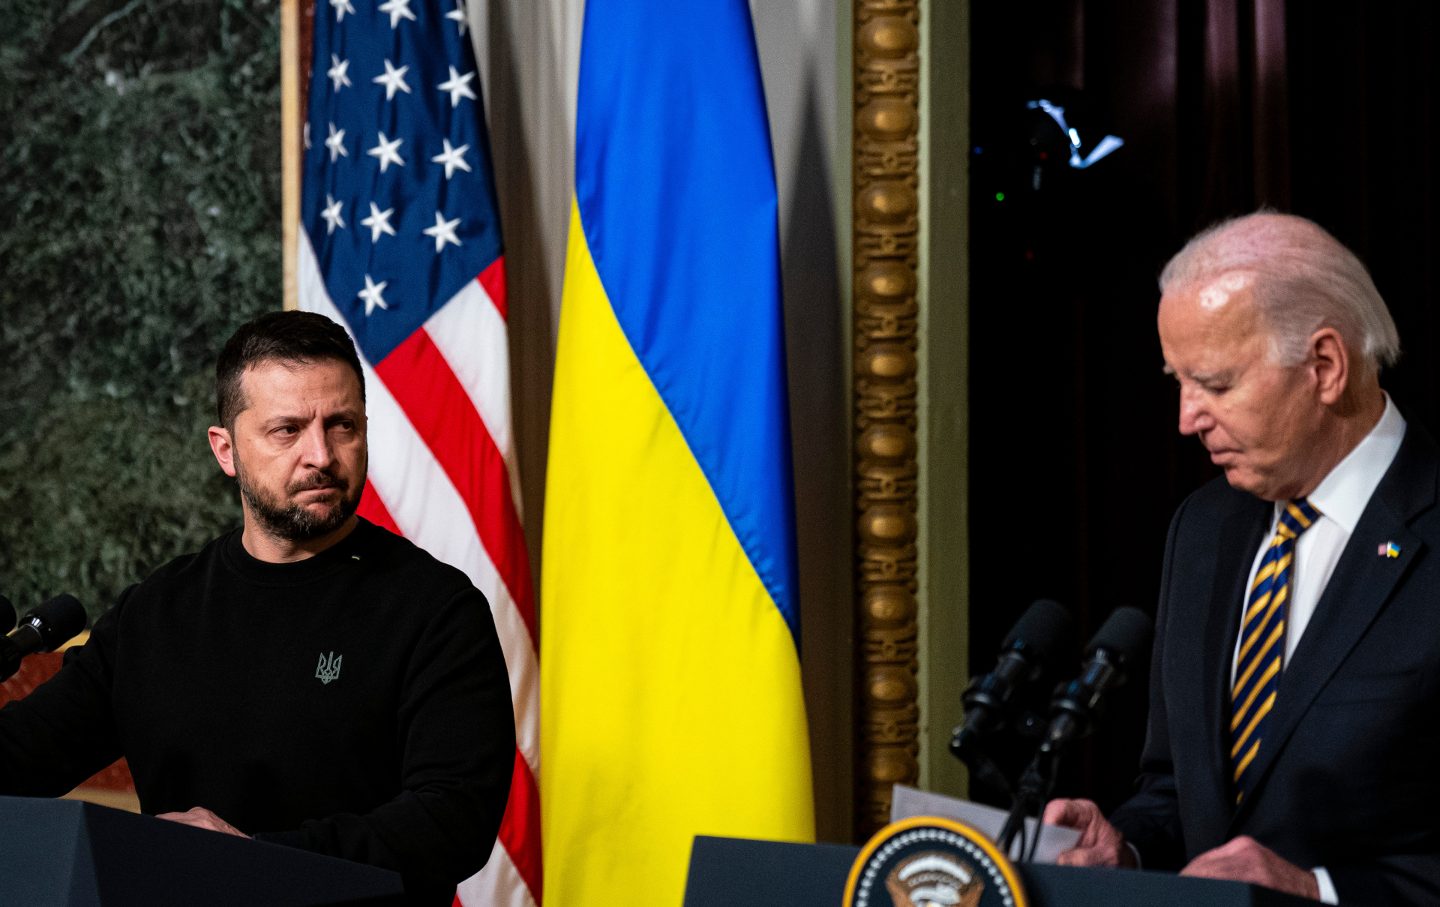 US President Joe Biden, right, and Ukrainian President Volodymyr Zelensky during a news conference in the Indian Treaty Room on the White House complex, in Washington, D.C., on Tuesday, December 12, 2023.